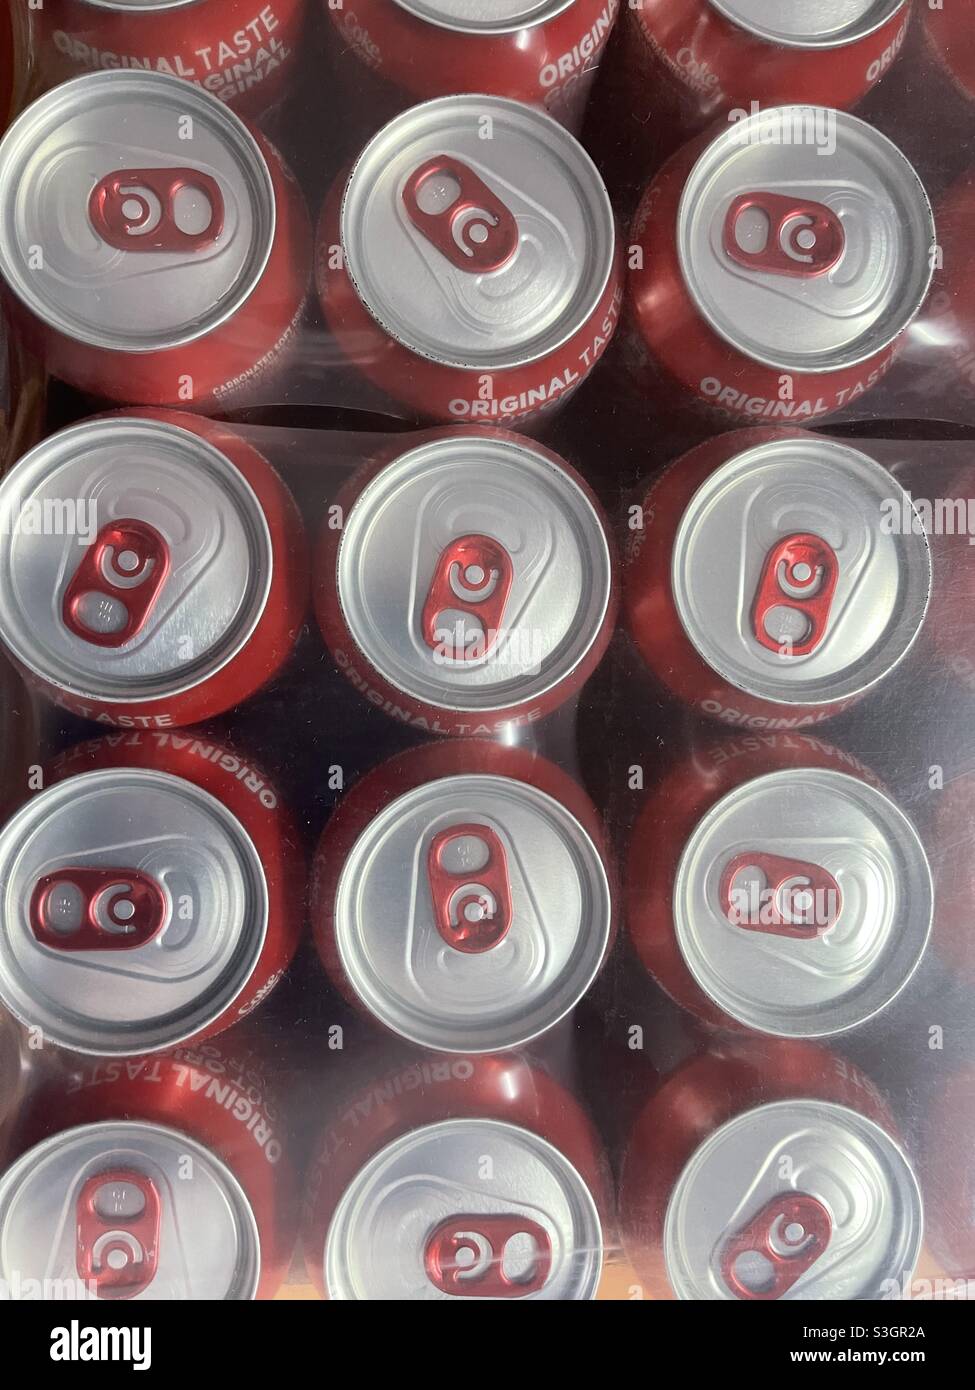 View from top on stowed red tins of softdrink Coca Cola in paper carton and wrapped with transparent plastic cover. Stock Photo